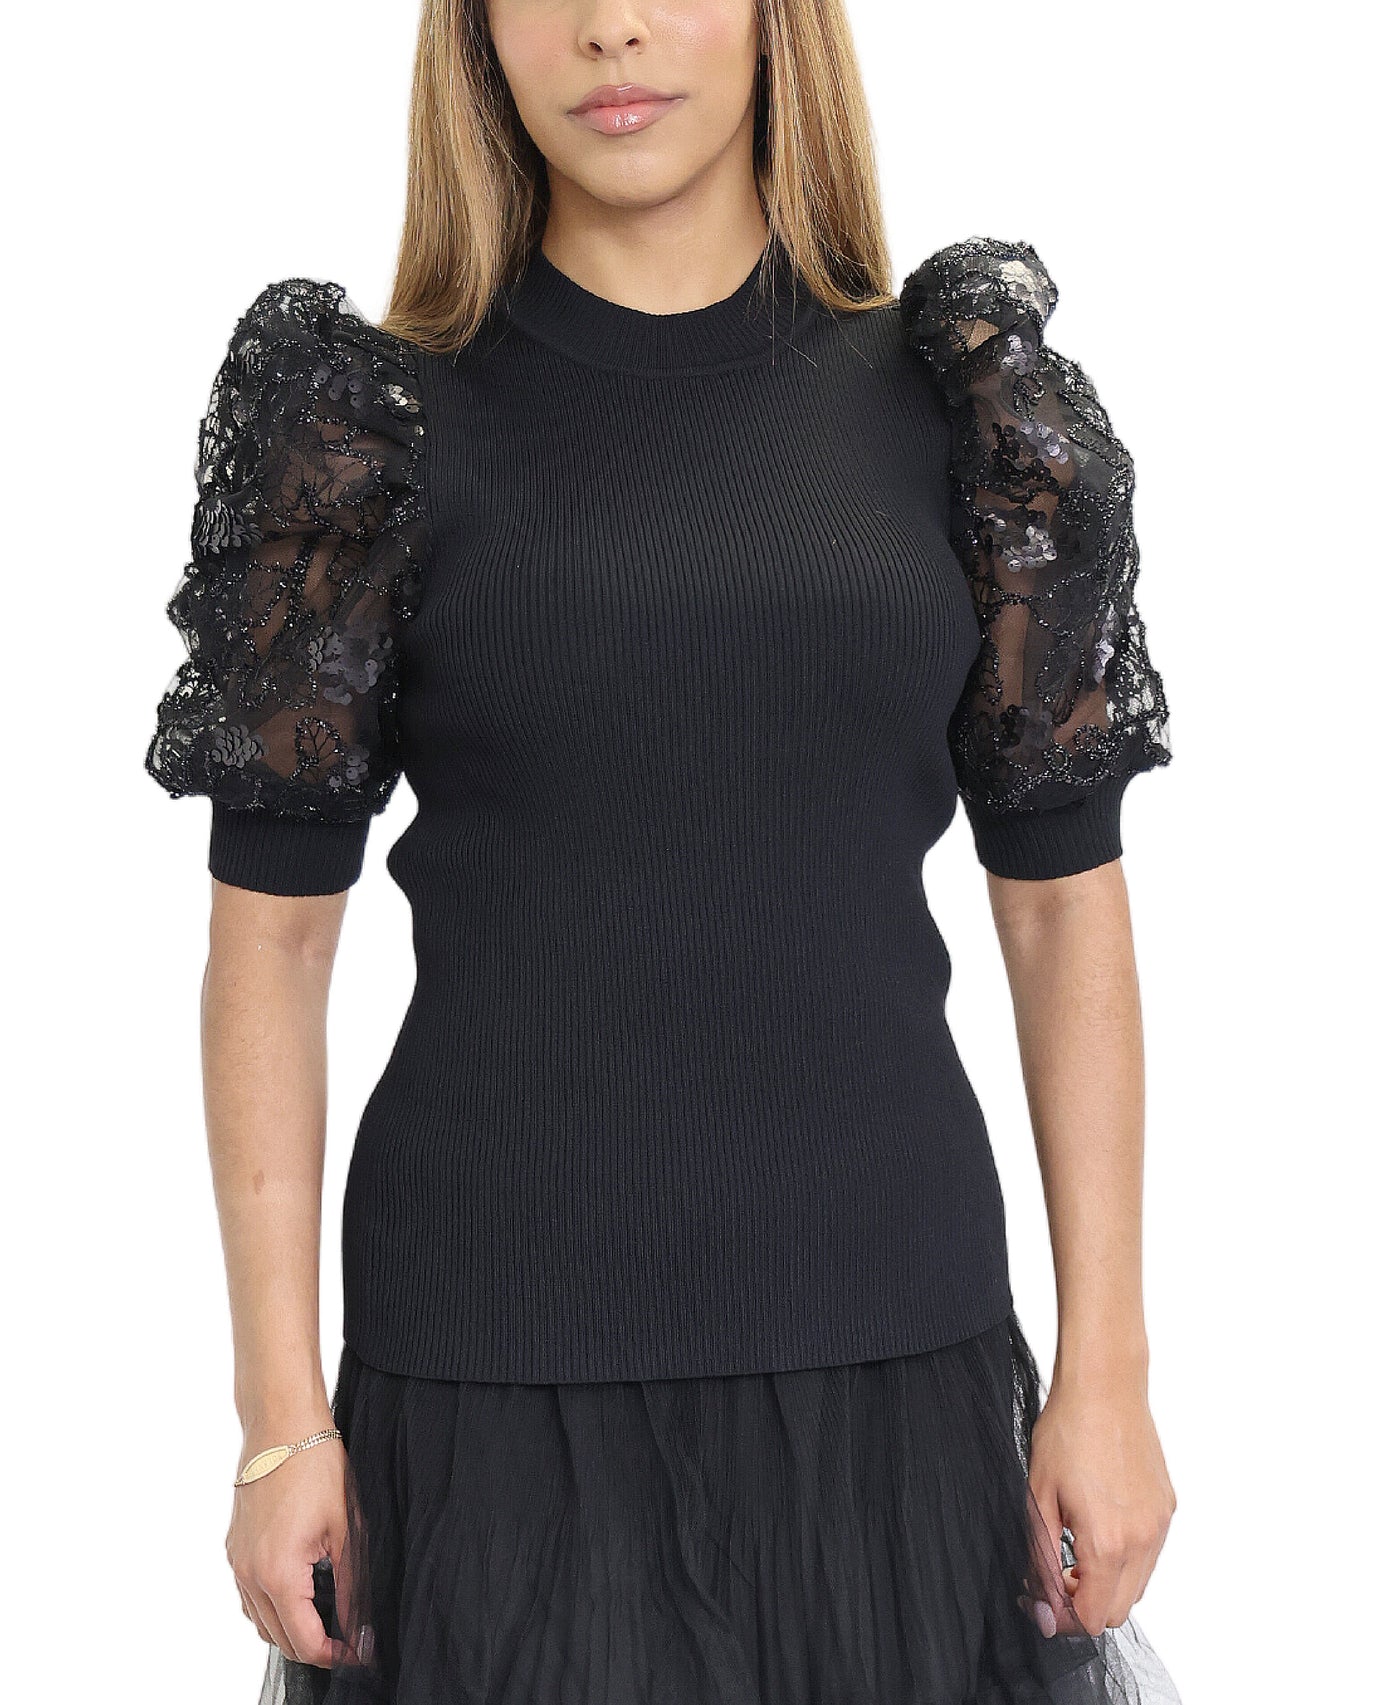 Knit Top w/ Sequin Puff Sleeves image 1